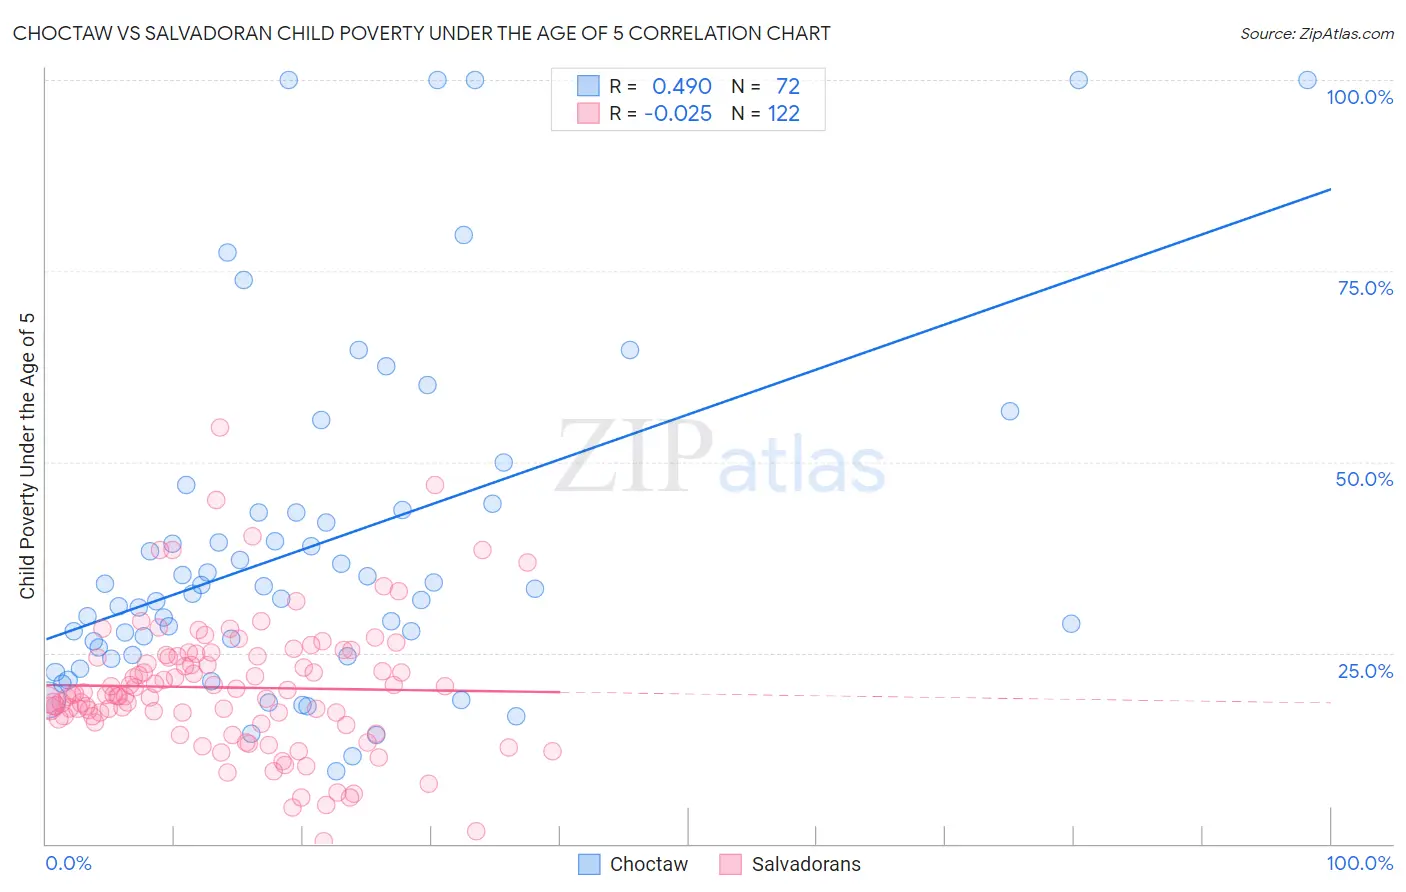 Choctaw vs Salvadoran Child Poverty Under the Age of 5